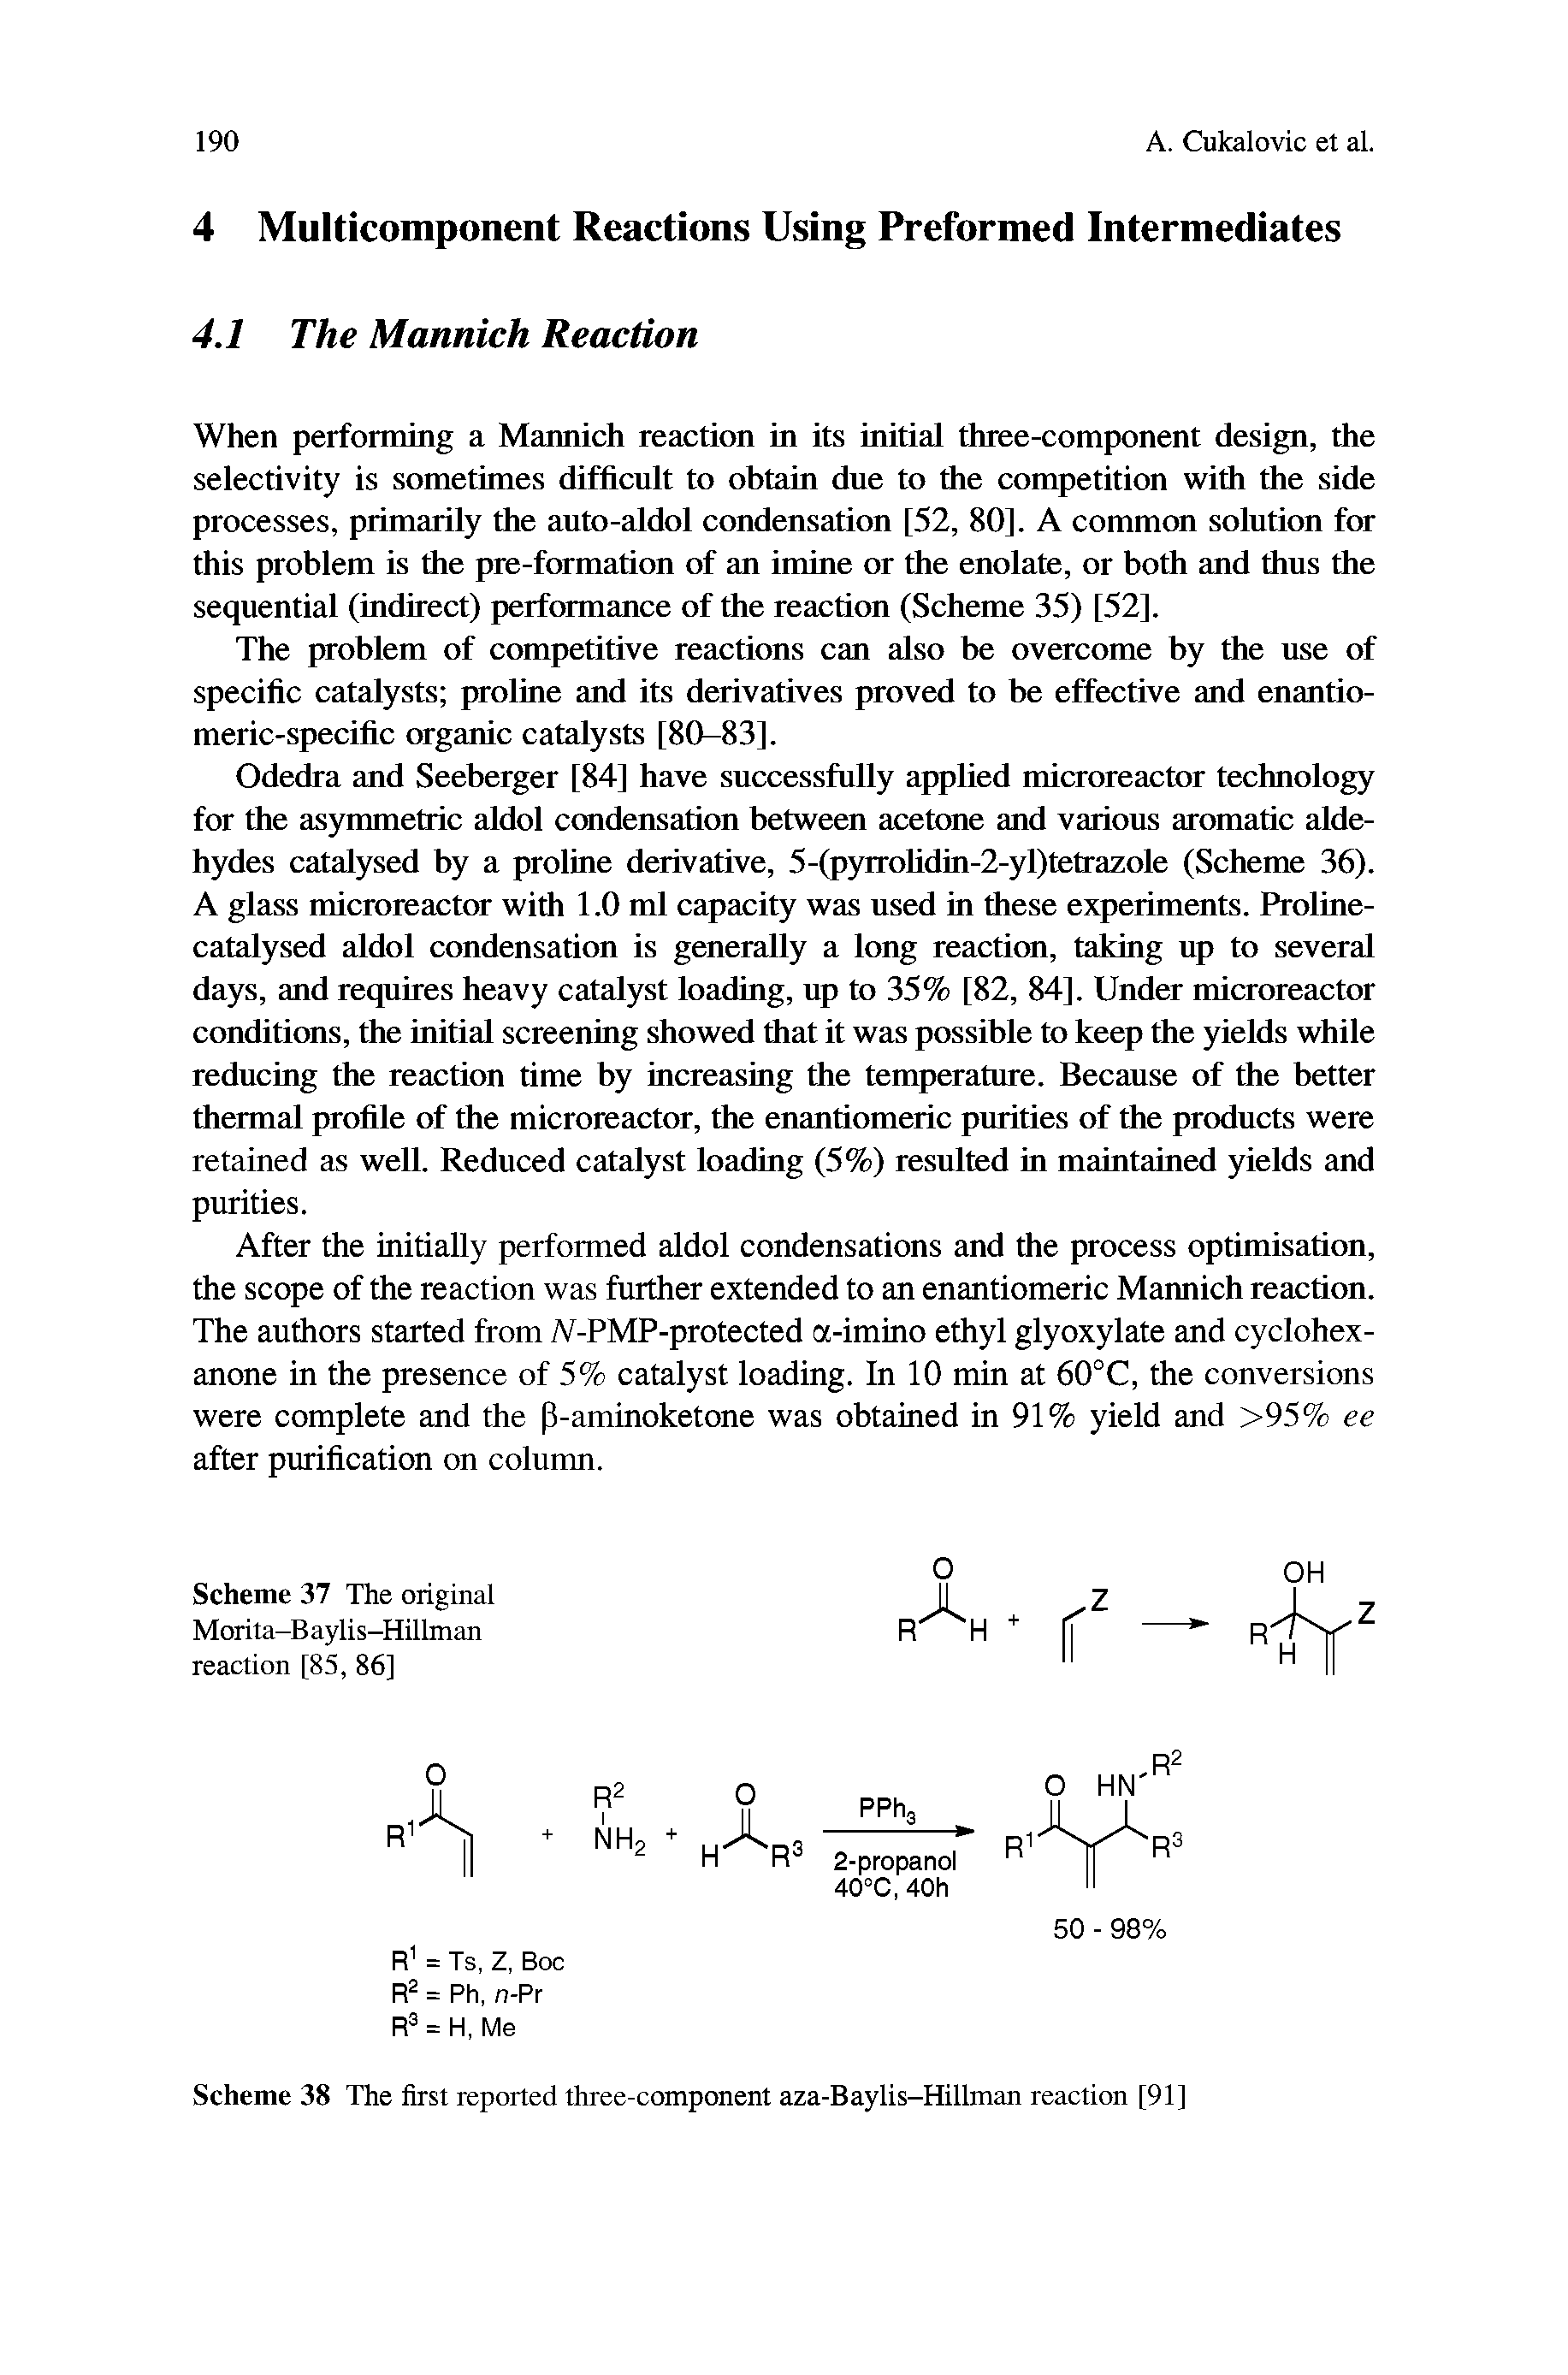 Scheme 38 The first reported three-component aza-Baylis-Hillman reaction [91]...